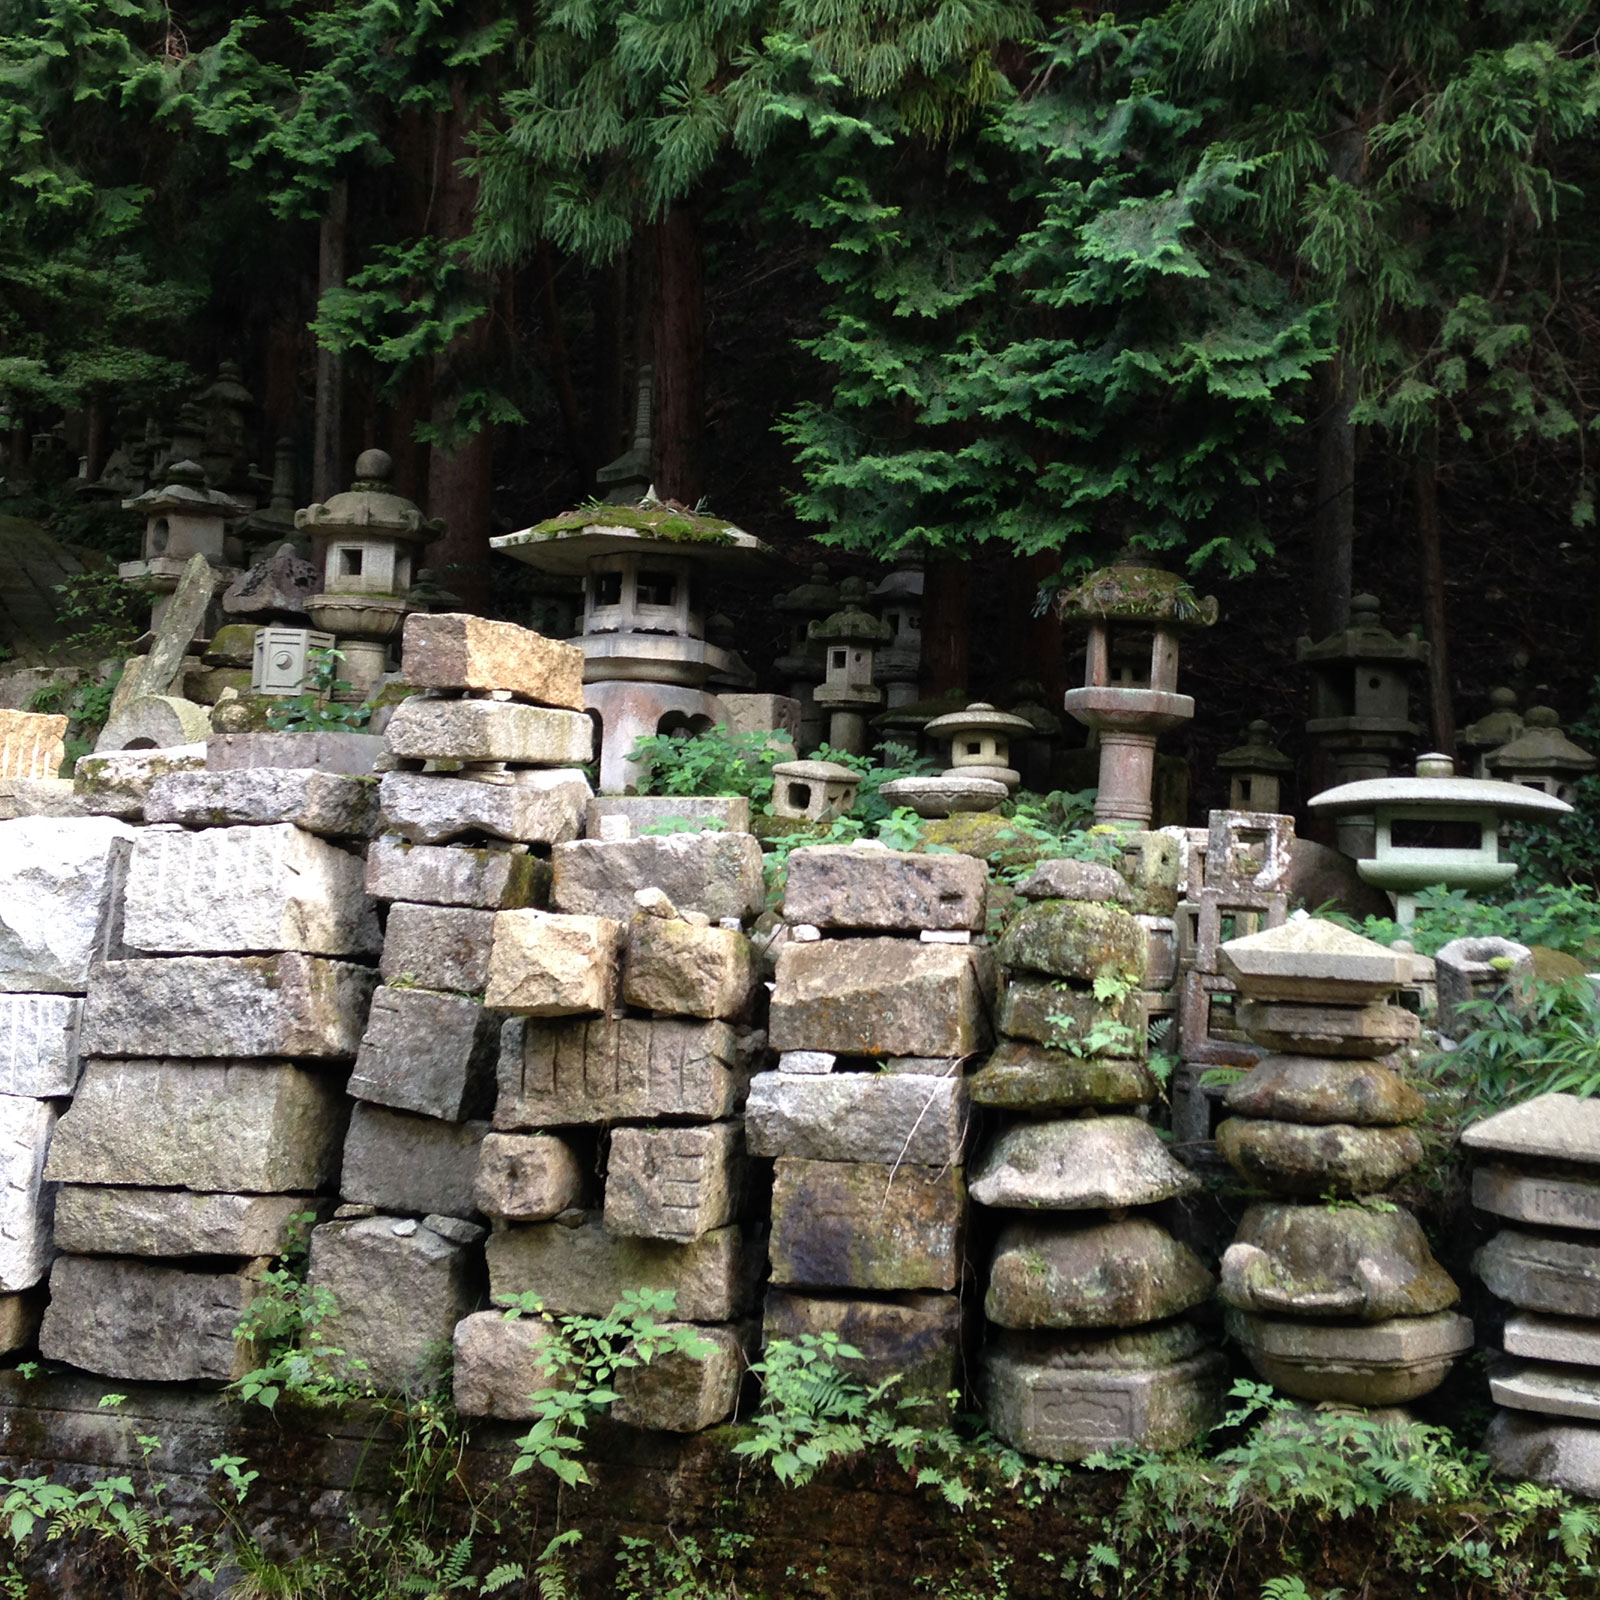 Postcards from Japan with horticulturist Ayse Pogue